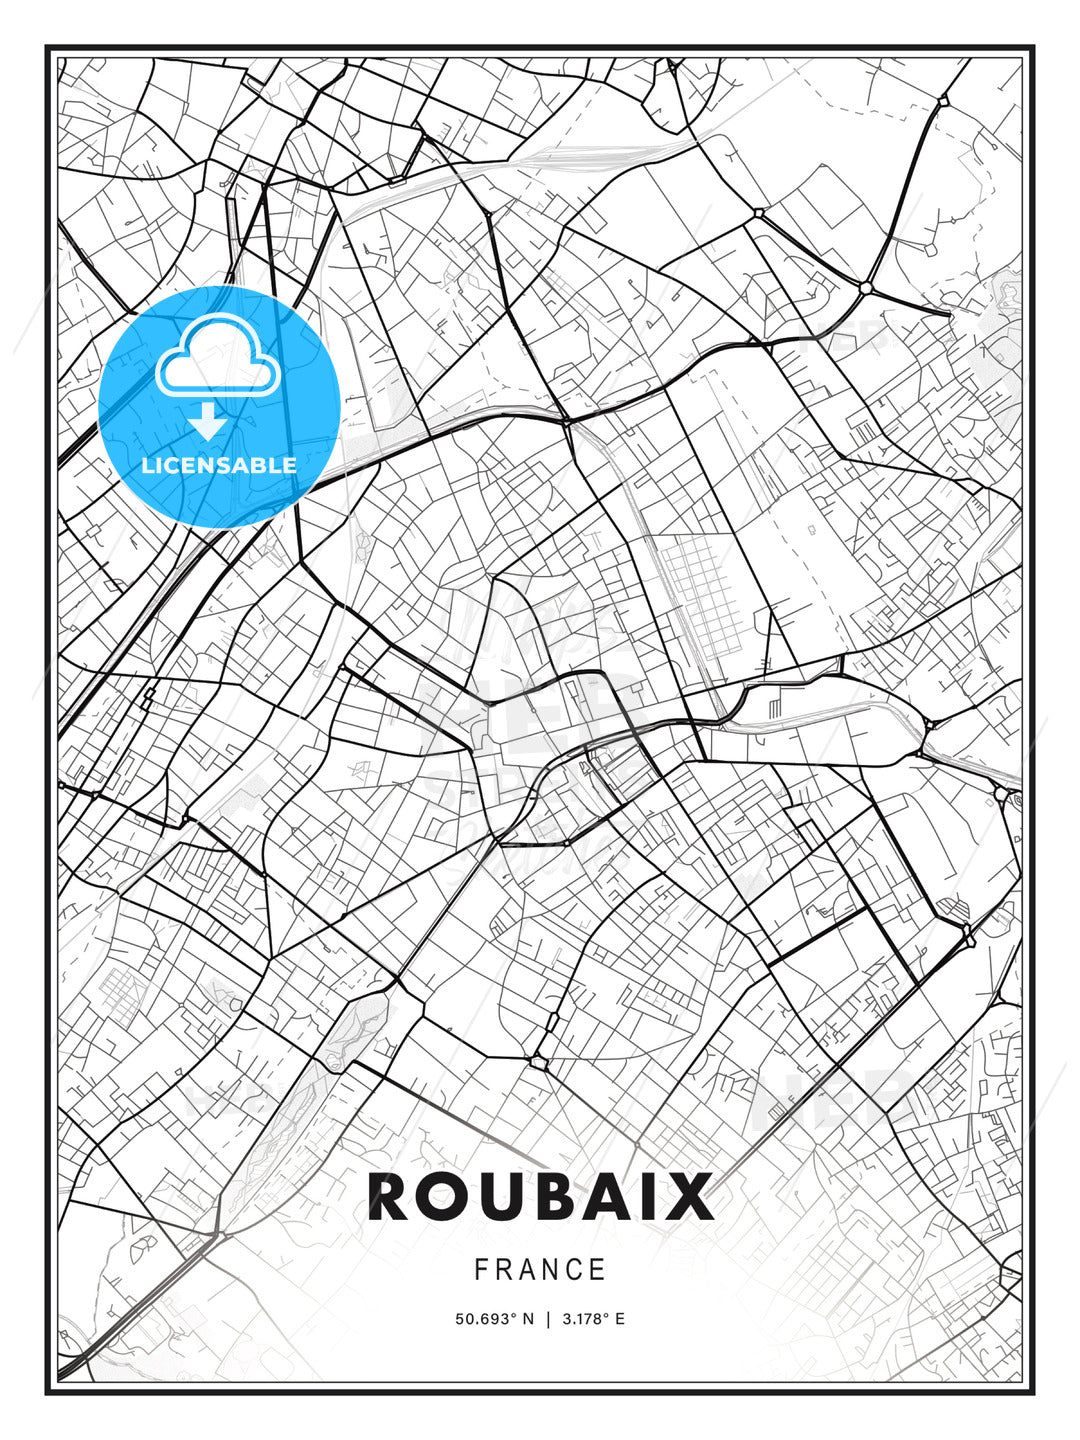 Roubaix, France, Modern Print Template in Various Formats - HEBSTREITS Sketches